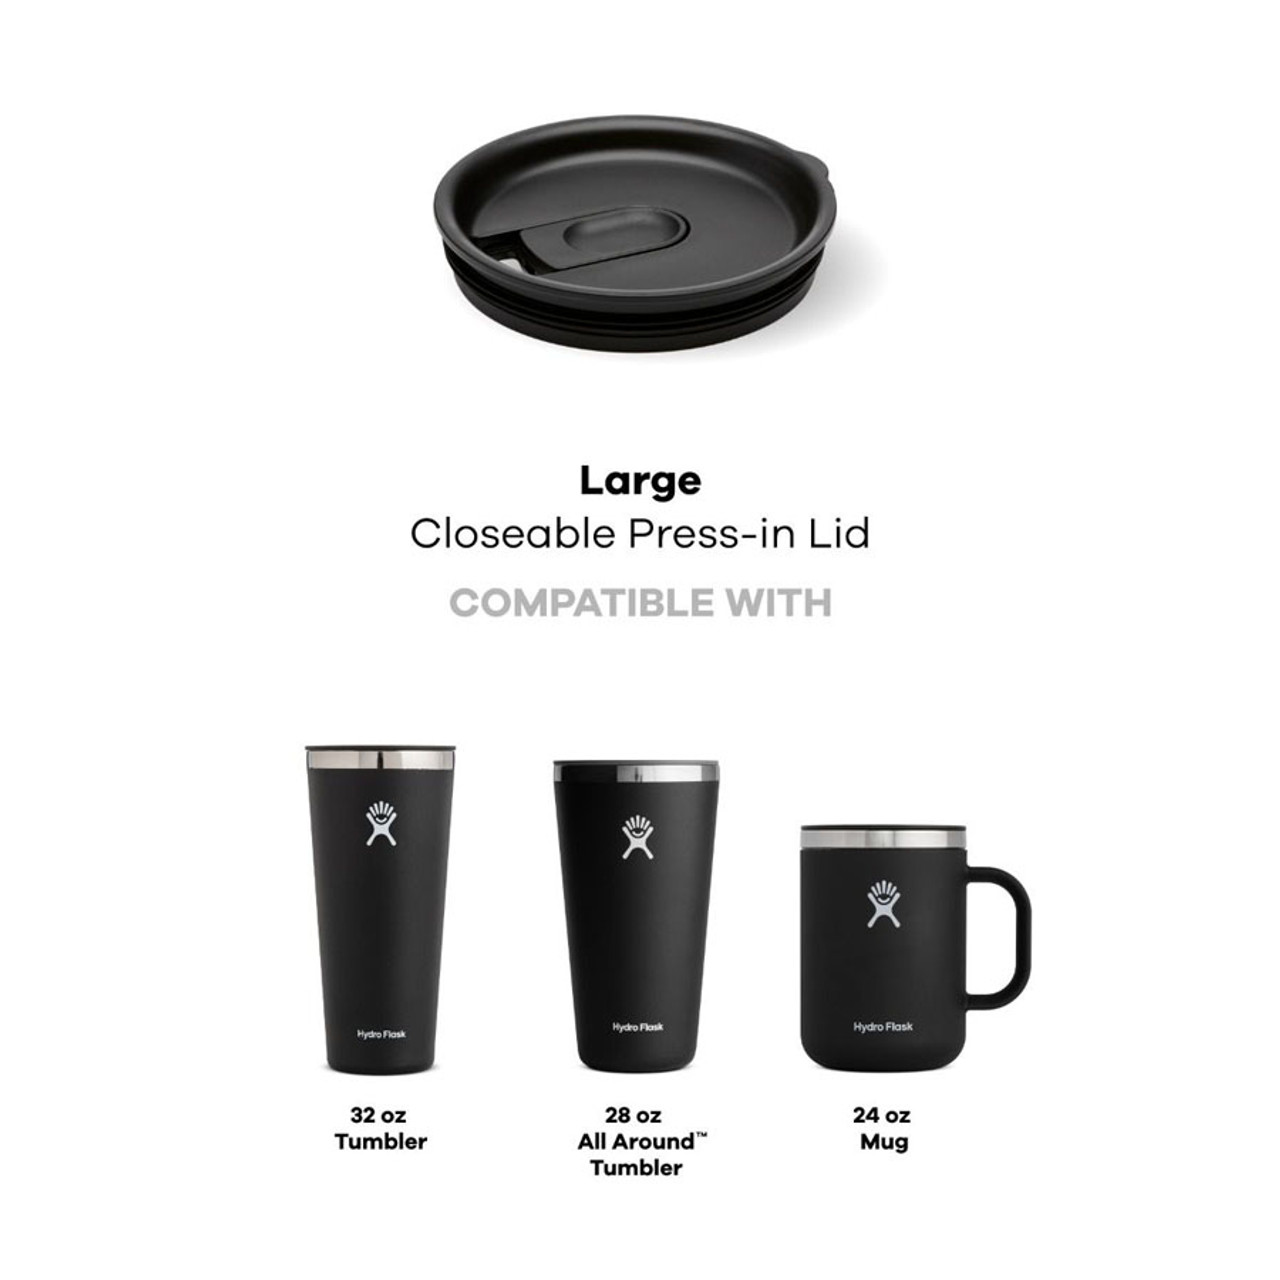 https://cdn11.bigcommerce.com/s-p4e2op94ll/images/stencil/1280x1280/products/2172/9332/large_-_closeable_press_in_lid_compatibility_1__68179.1652300619.jpg?c=2?imbypass=on